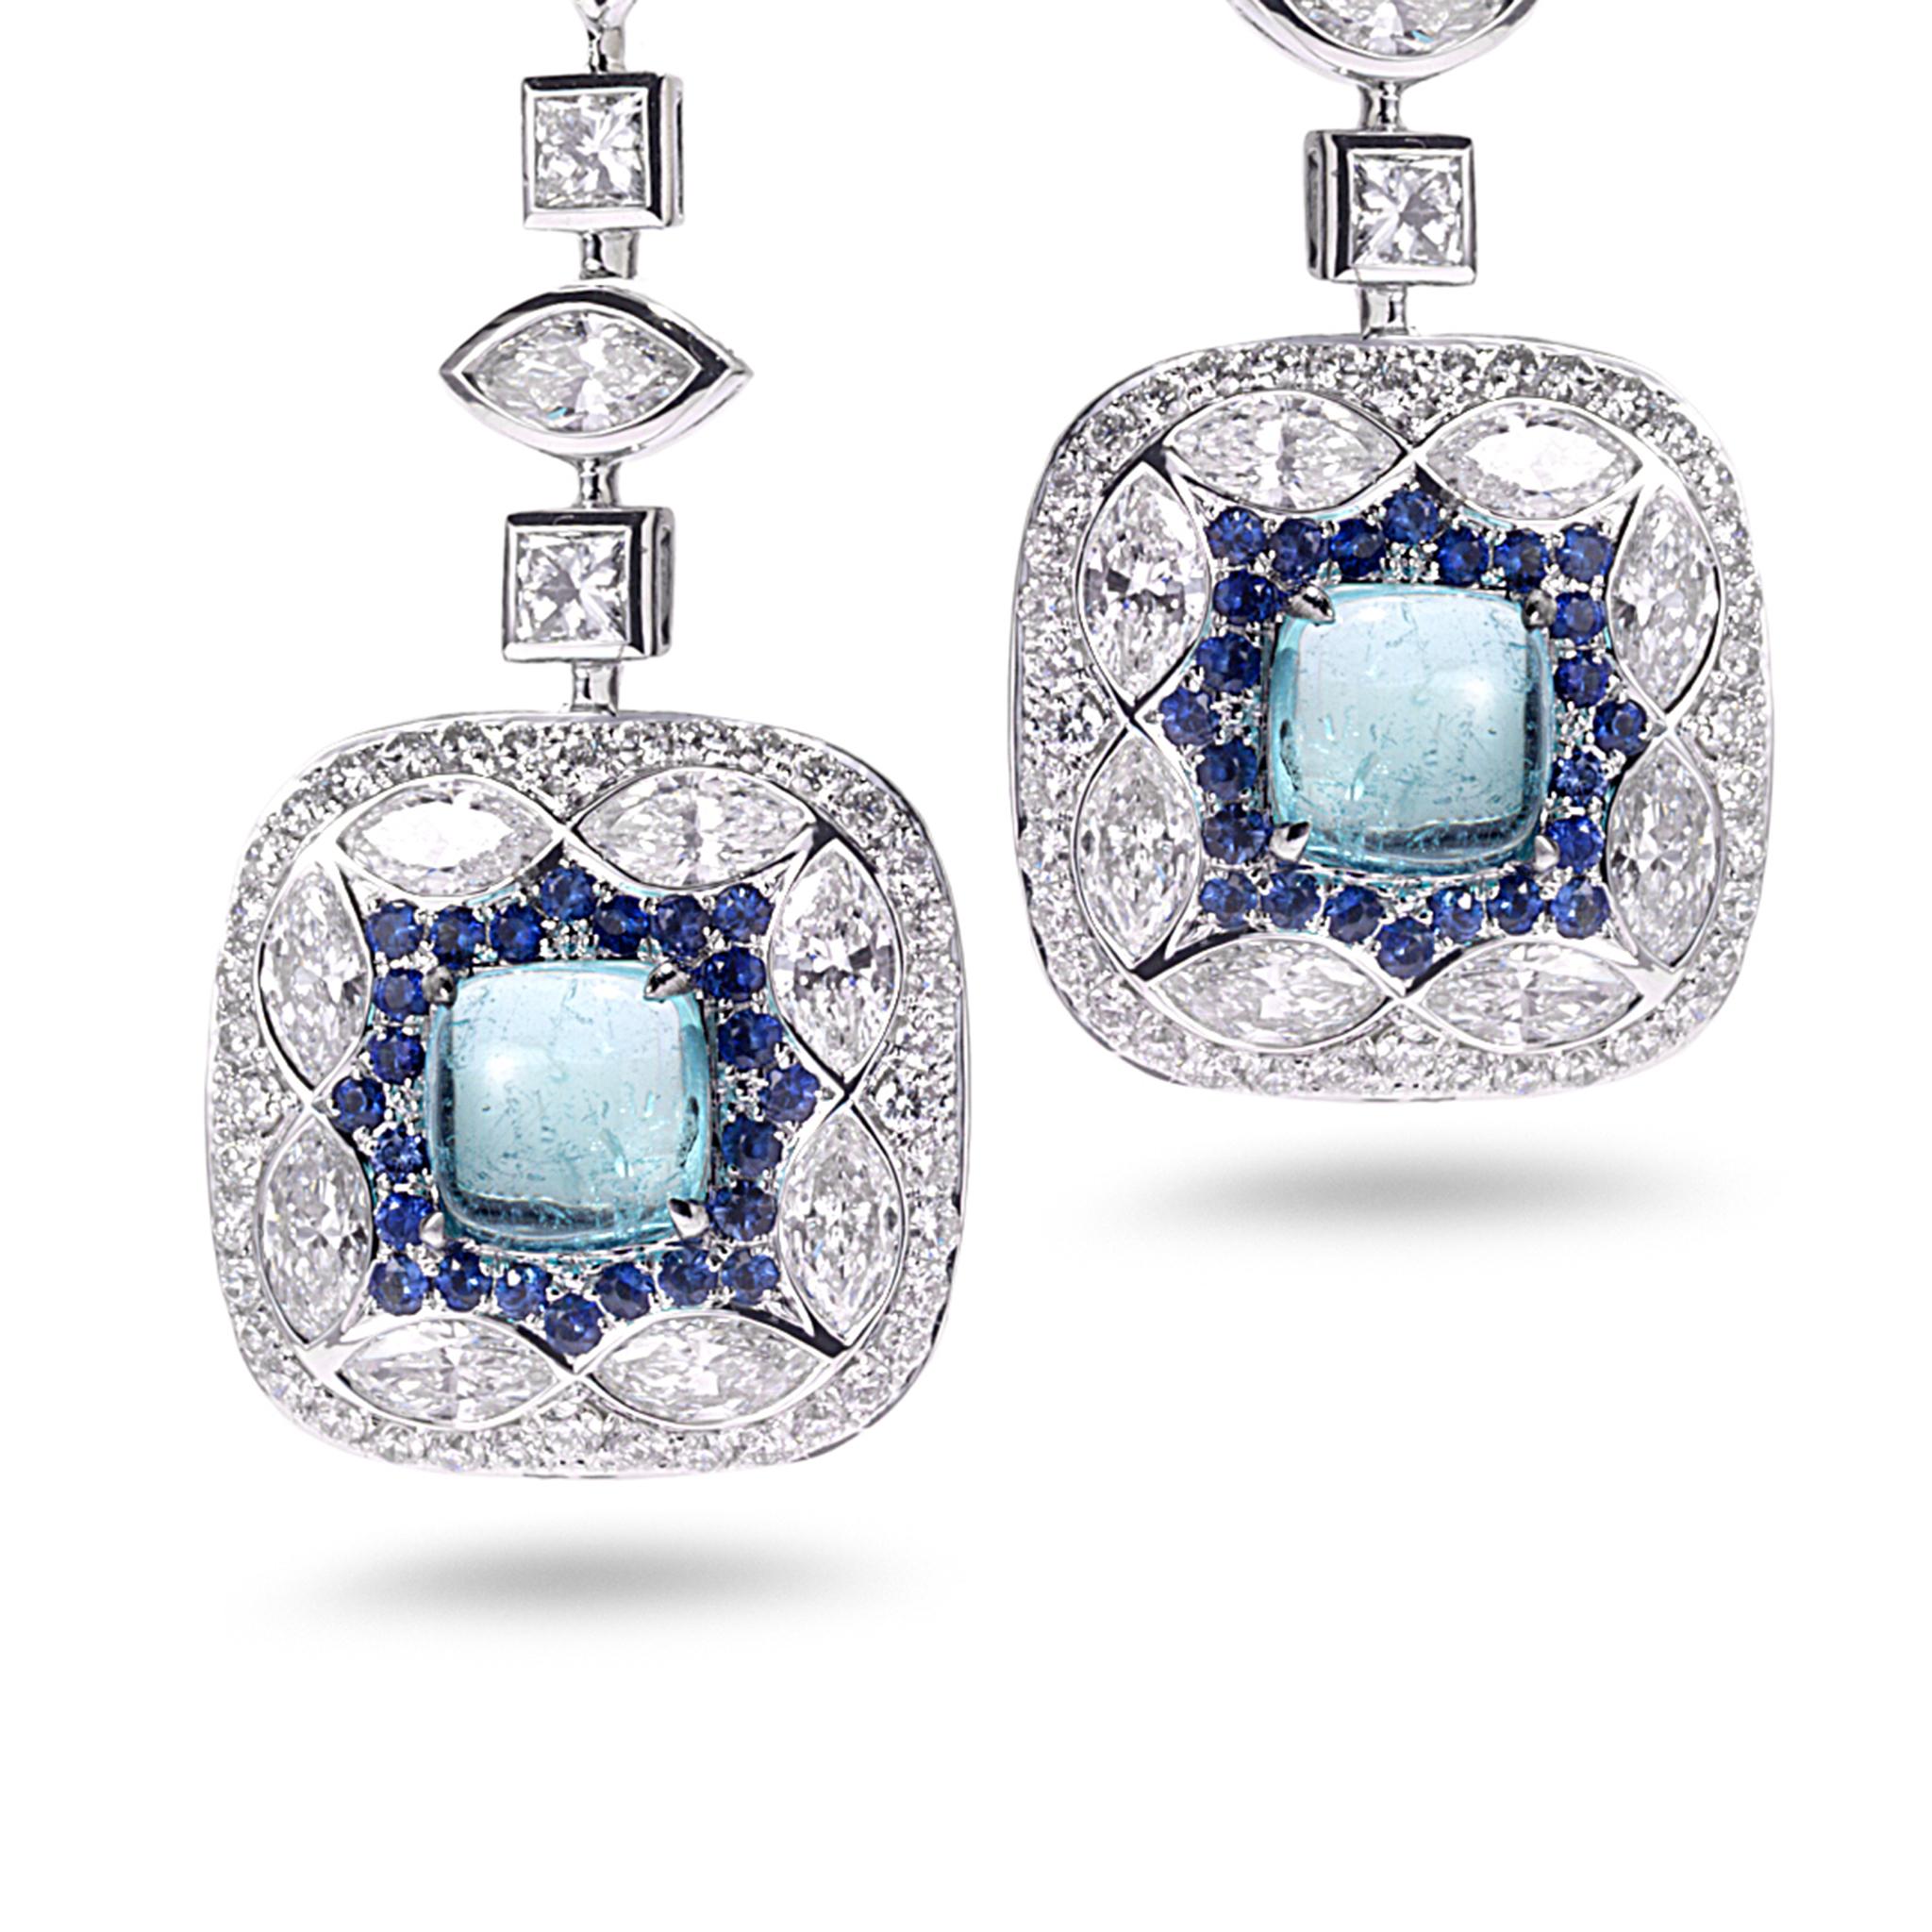 Trinity collection drop earrings set in 18K white gold with 2.17cts paraiba, 0.39cts blue sapphire and 3.87cts diamond.
